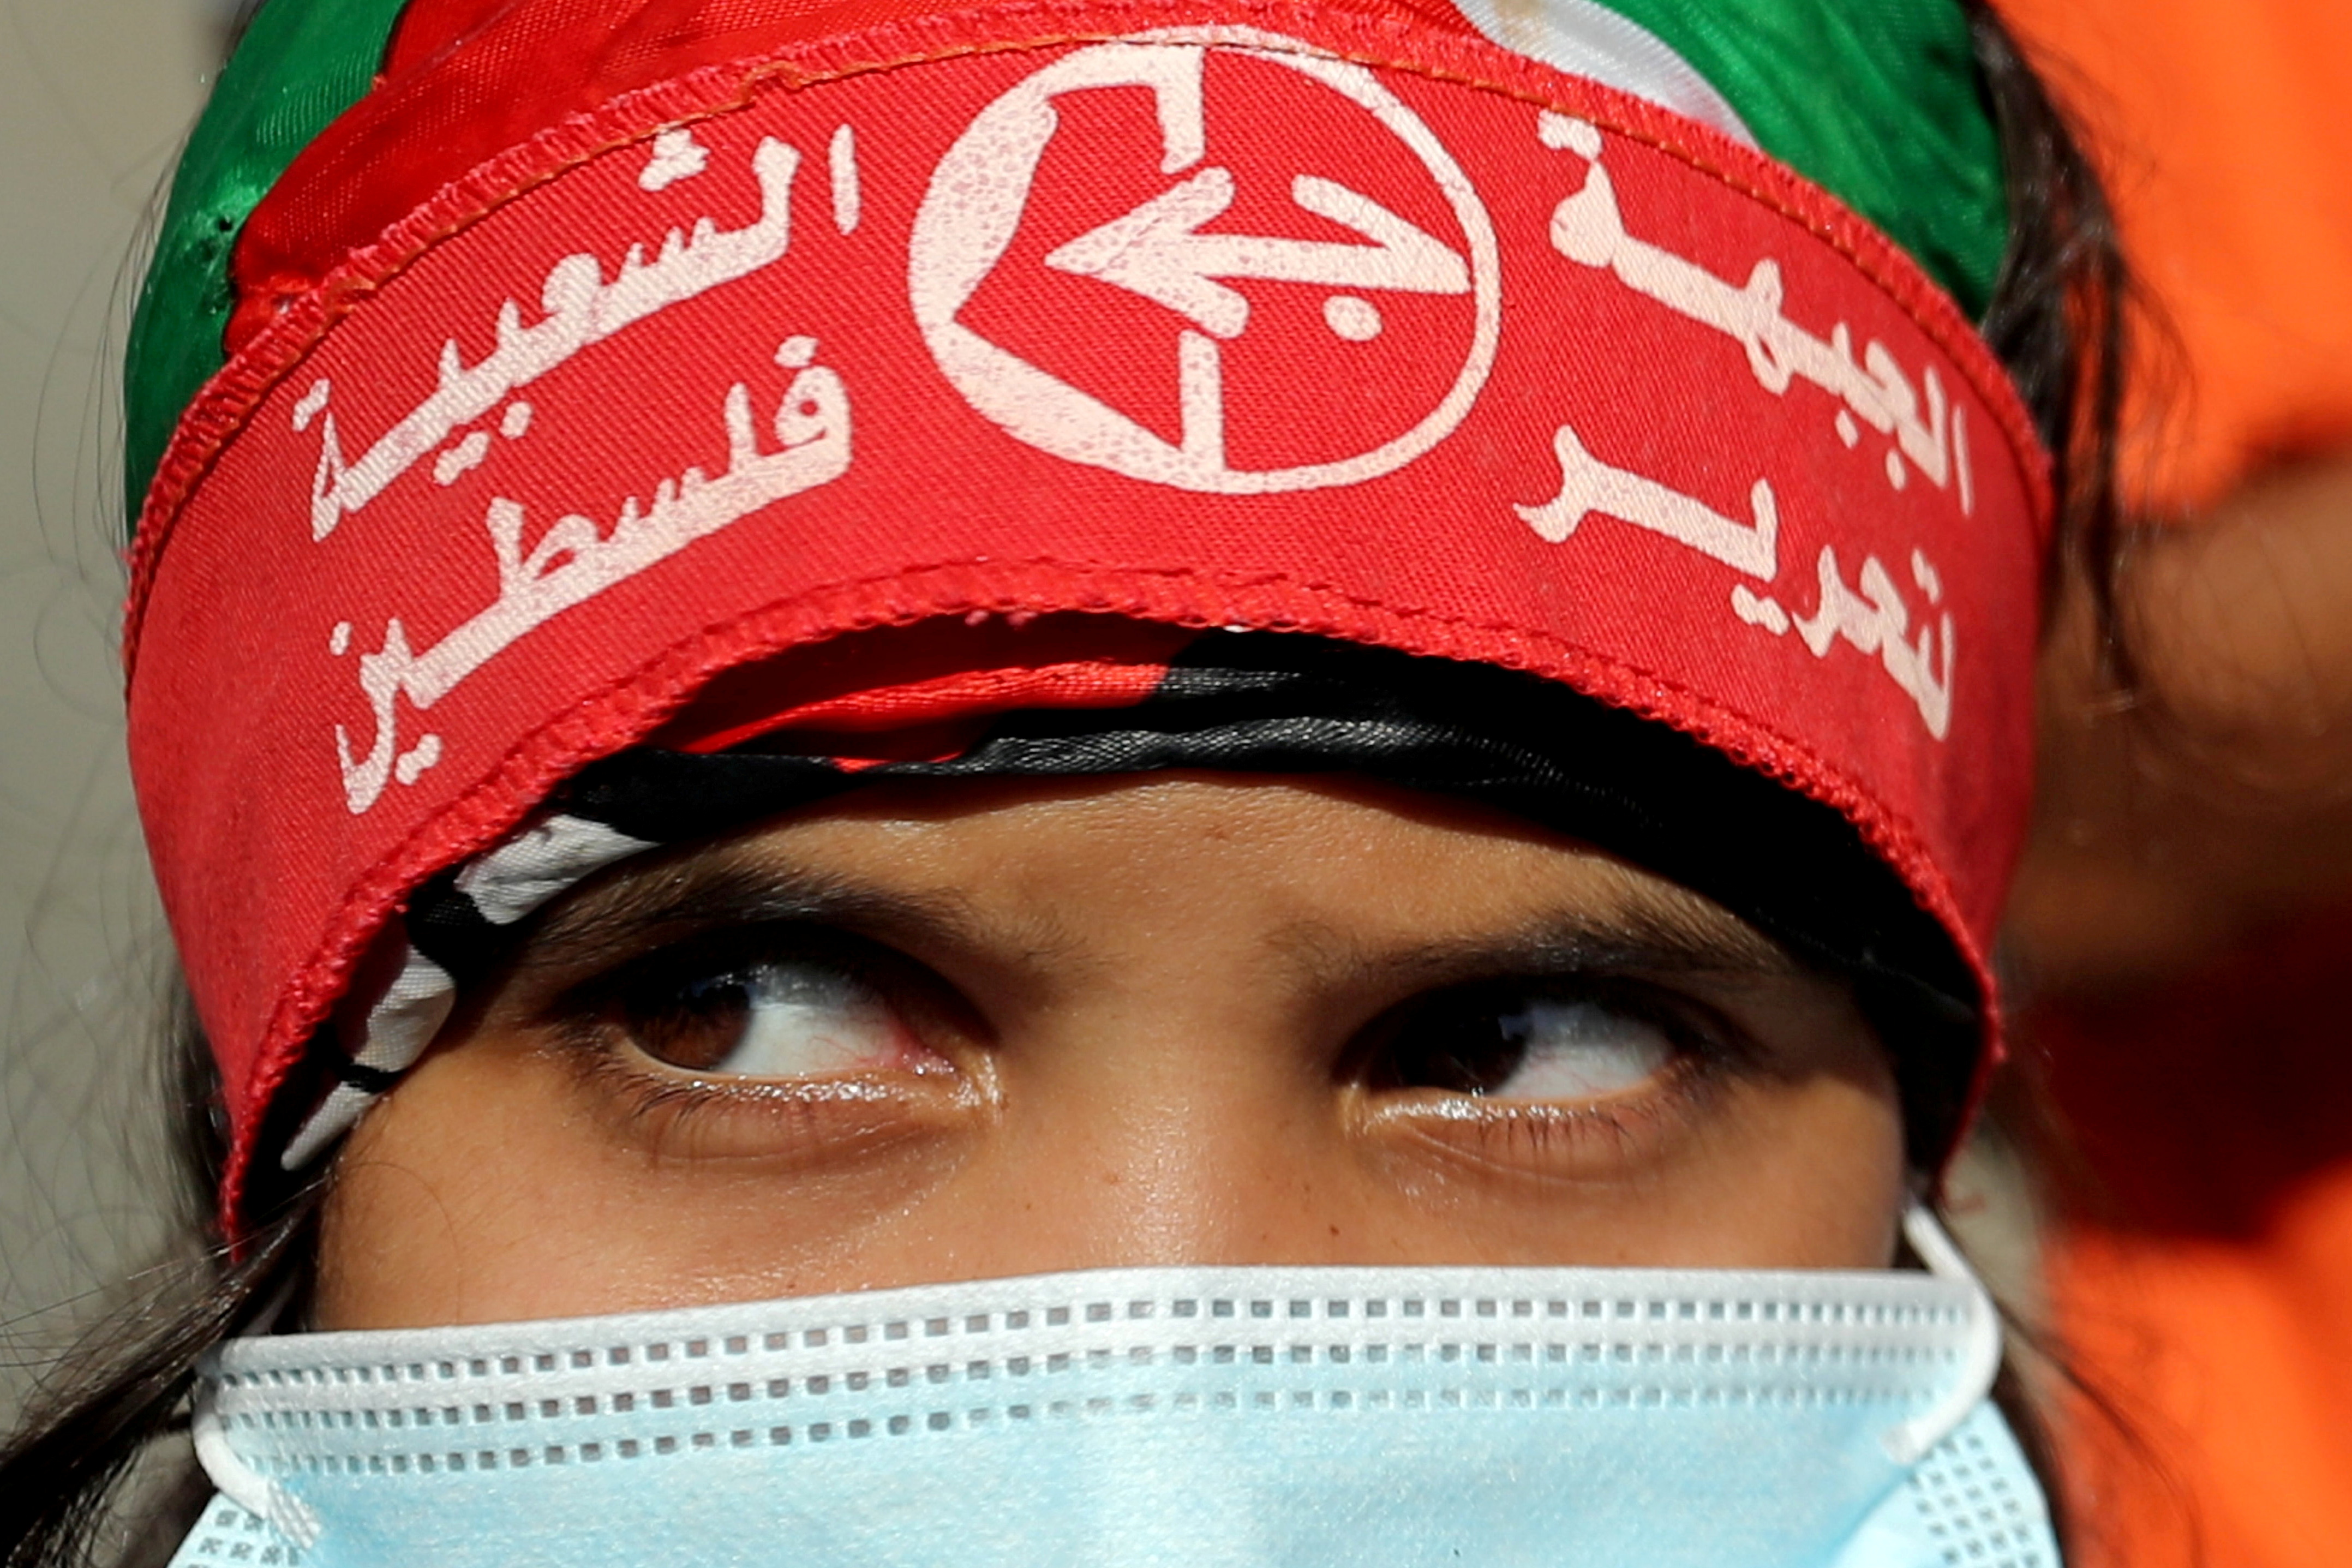 A girl wearing a protective face mask and the headband of the Popular Front for the Liberation of Palestine (PFLP) looks on during a rally to show solidarity with hunger-striking Palestinian prisoner Maher Al-Akhras